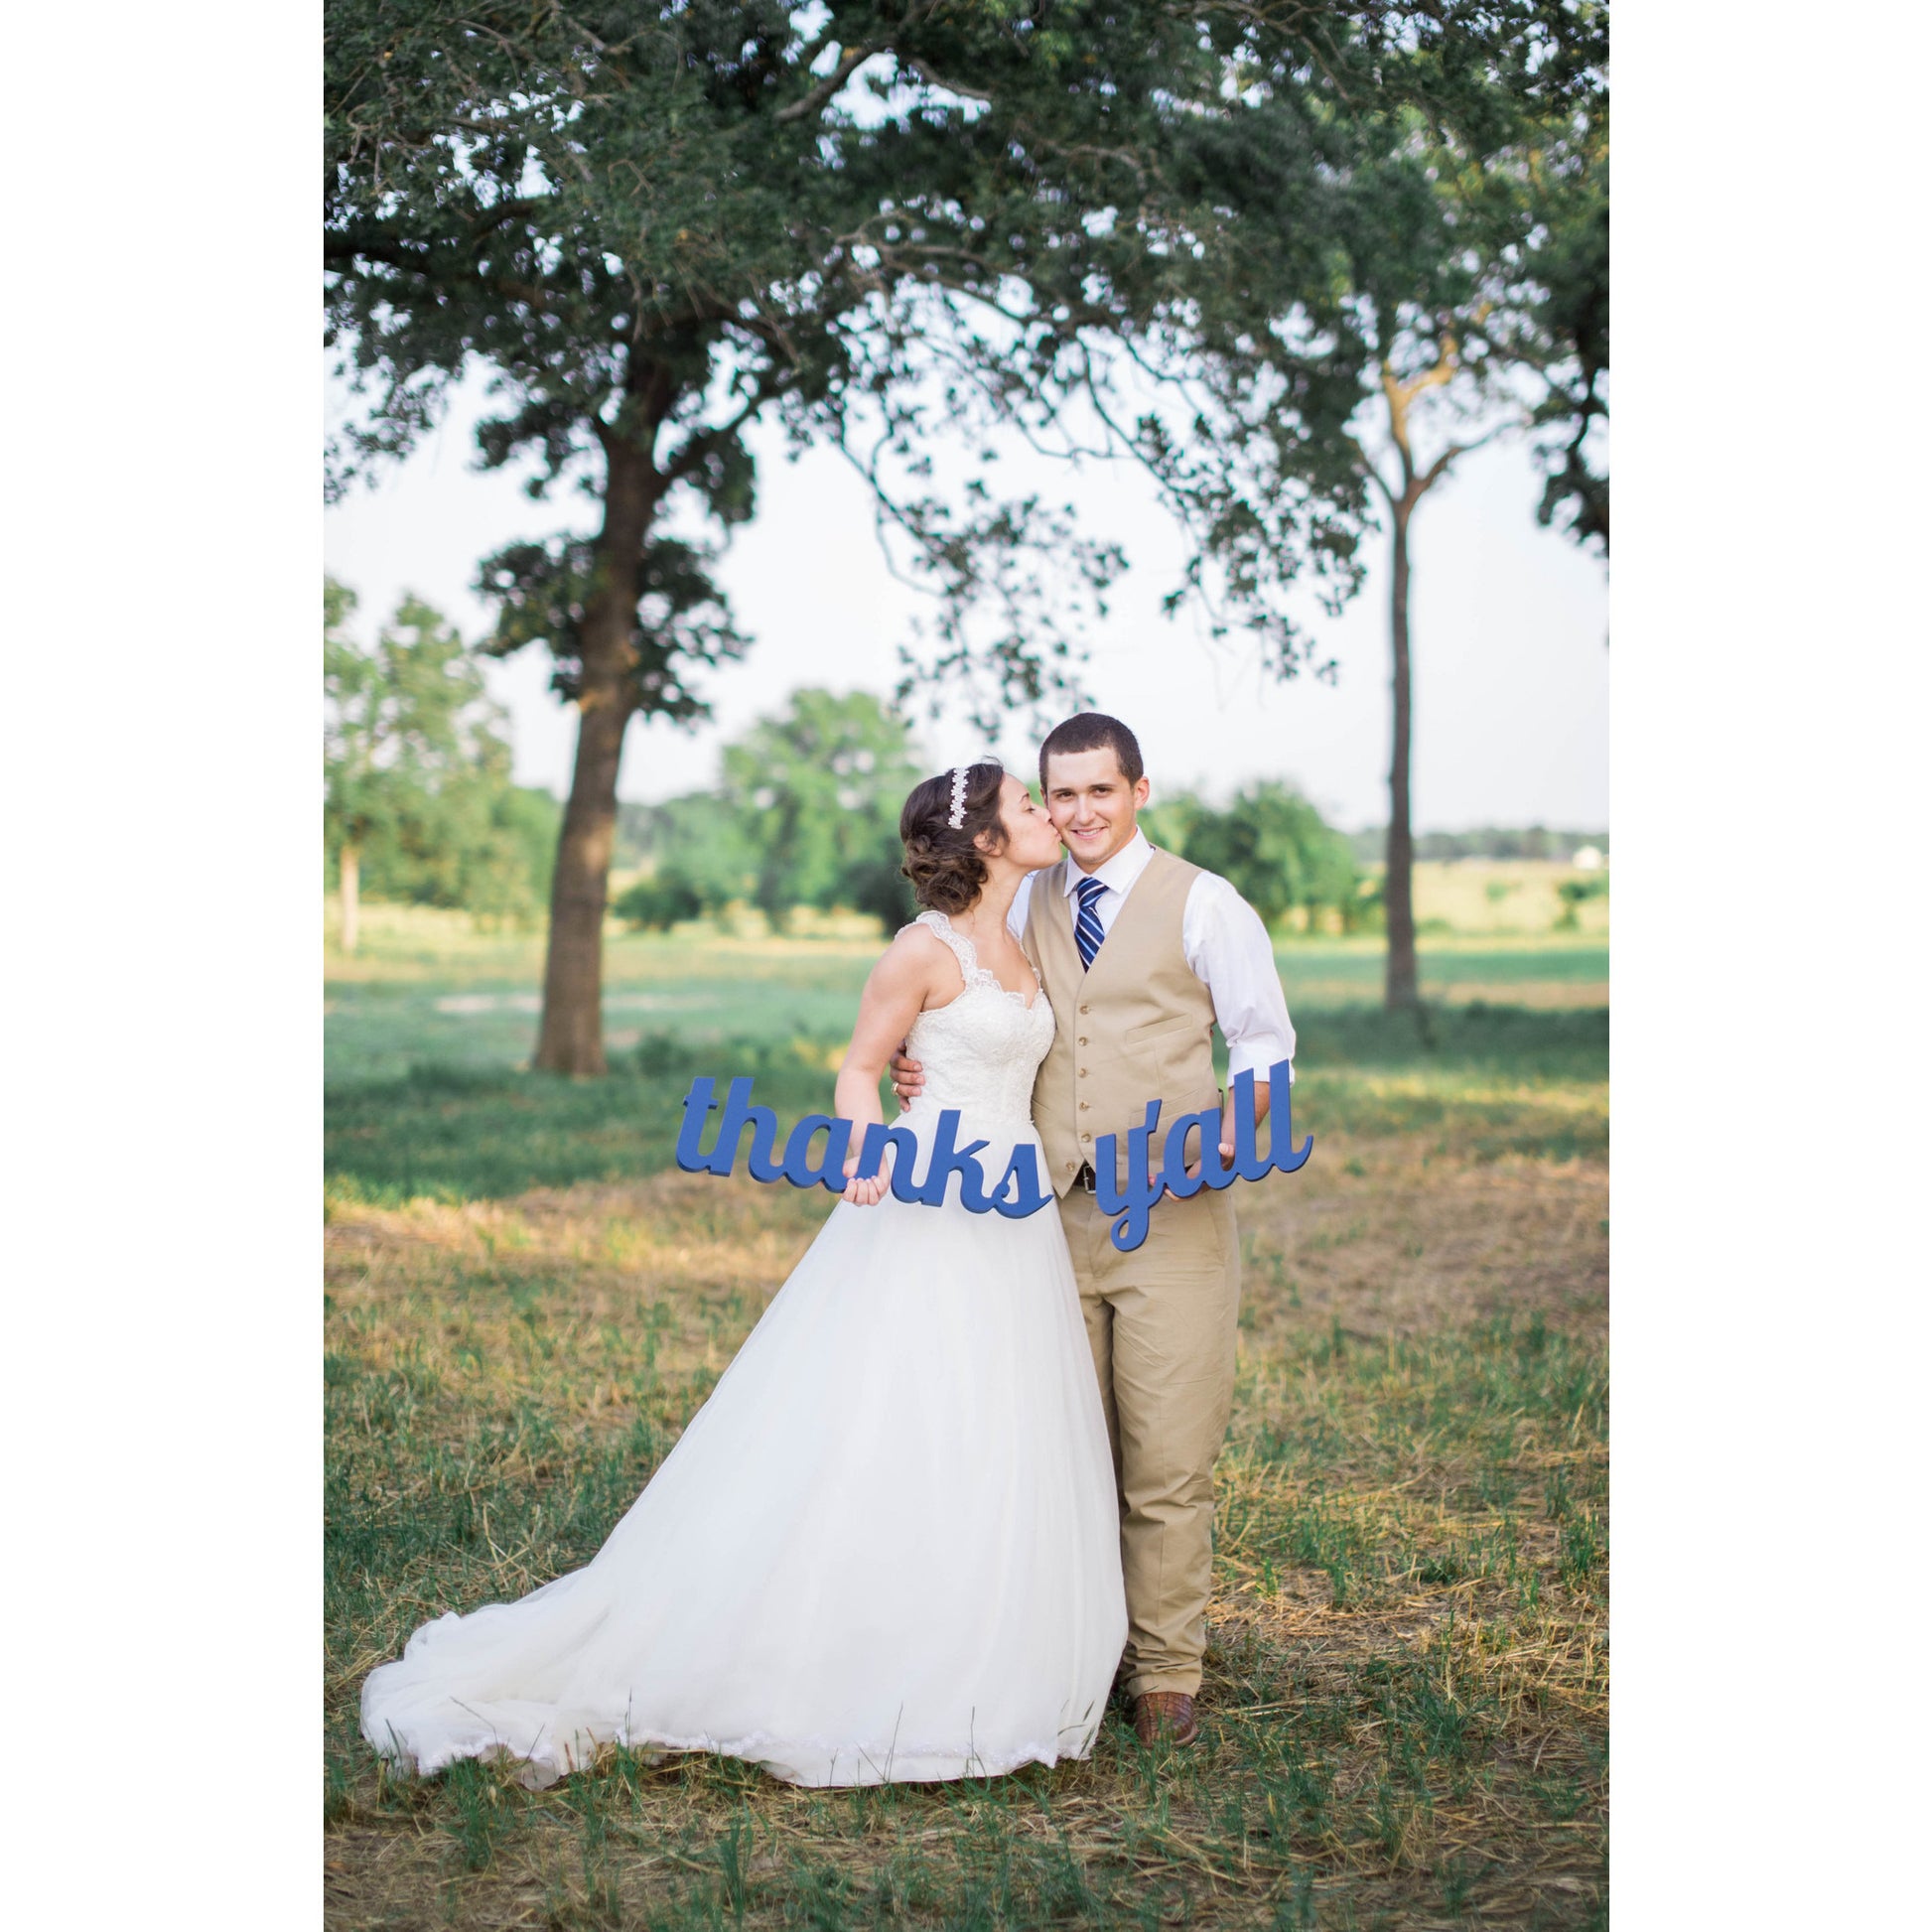 "Thanks Y'all" Sign Wedding Photo Prop - Wedding Decor Gifts